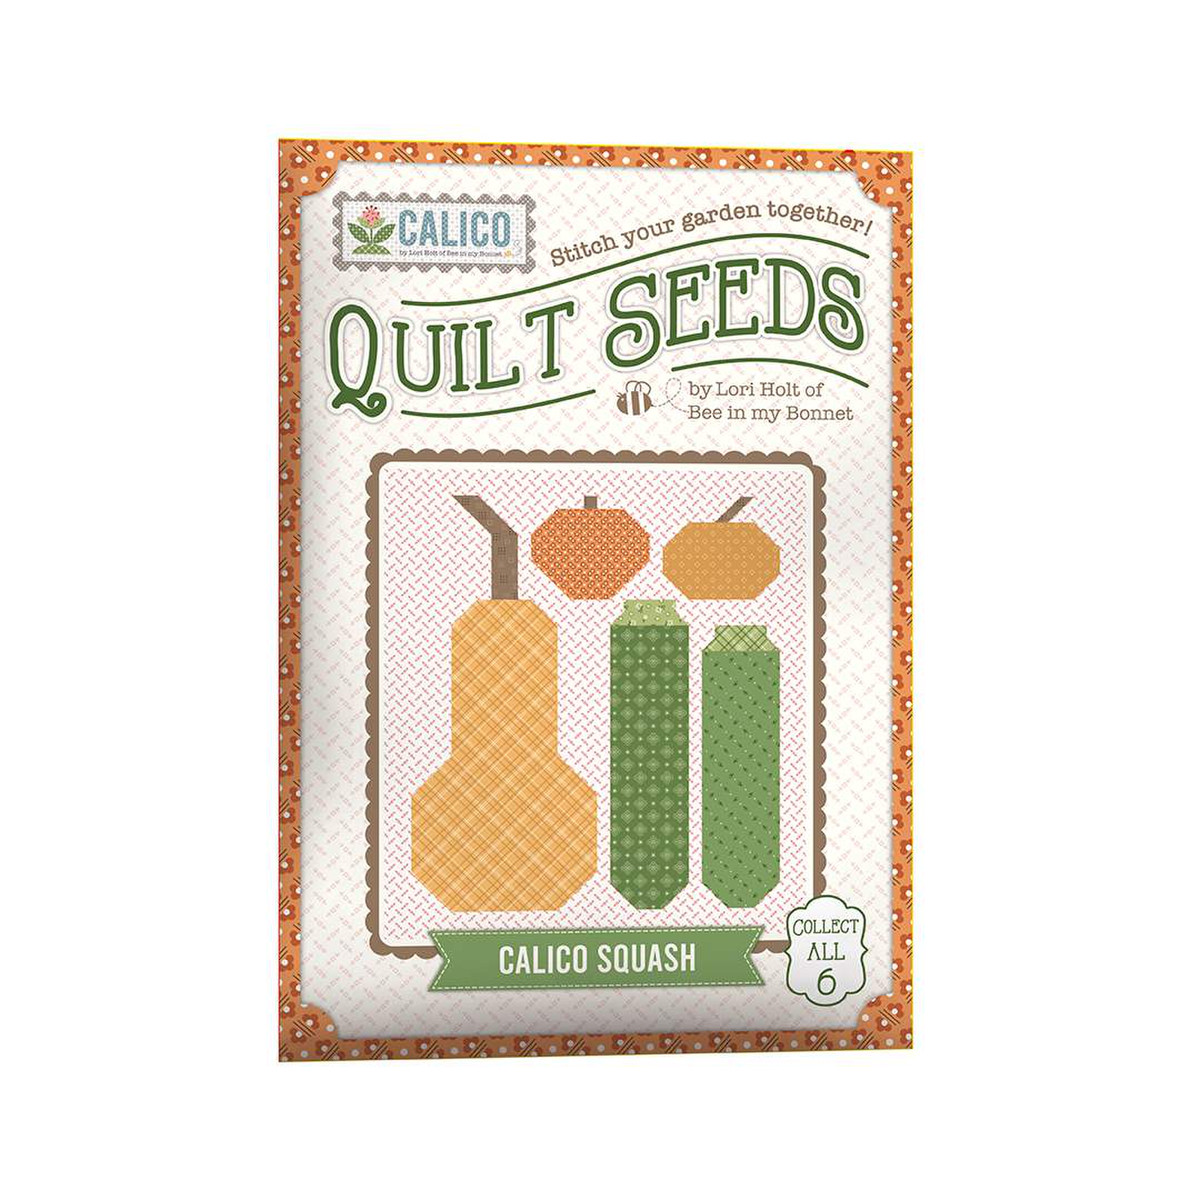 CALICO SQUASH QUILT SEEDS Pattern by LORI HOLT